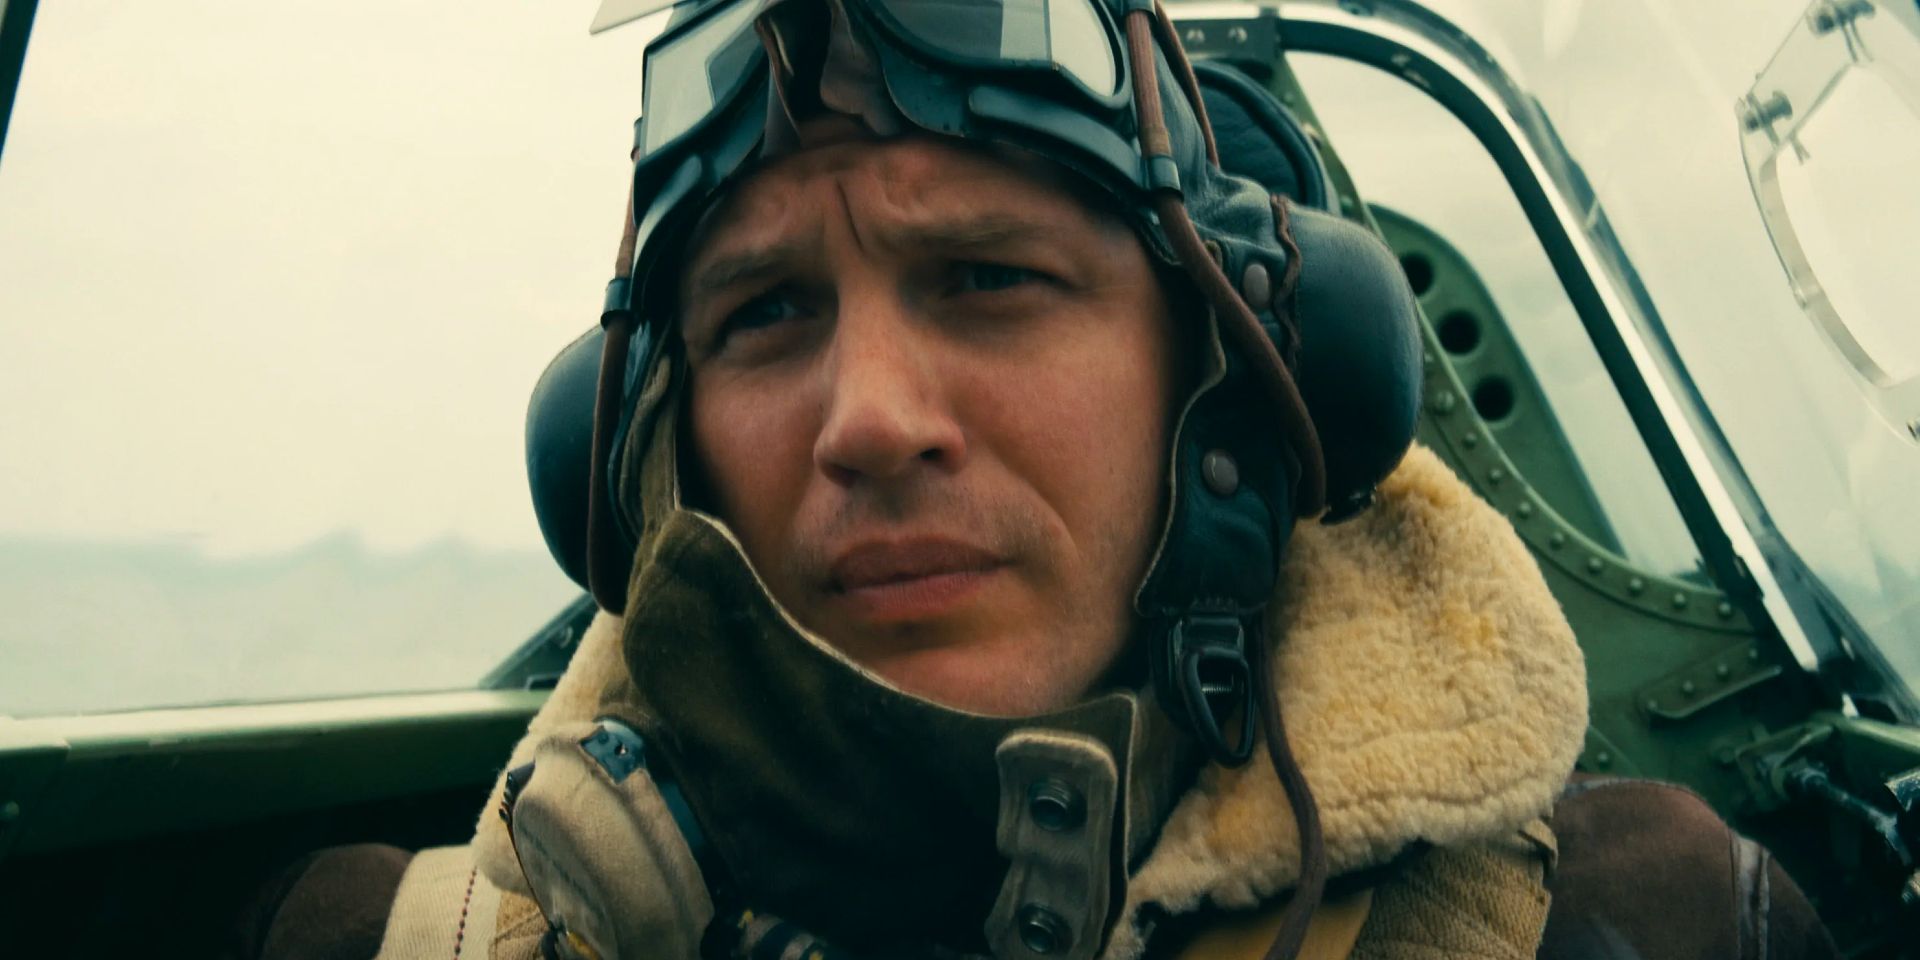 An English pilot in the cockpit of a Spitfire flying over Dunkirk.